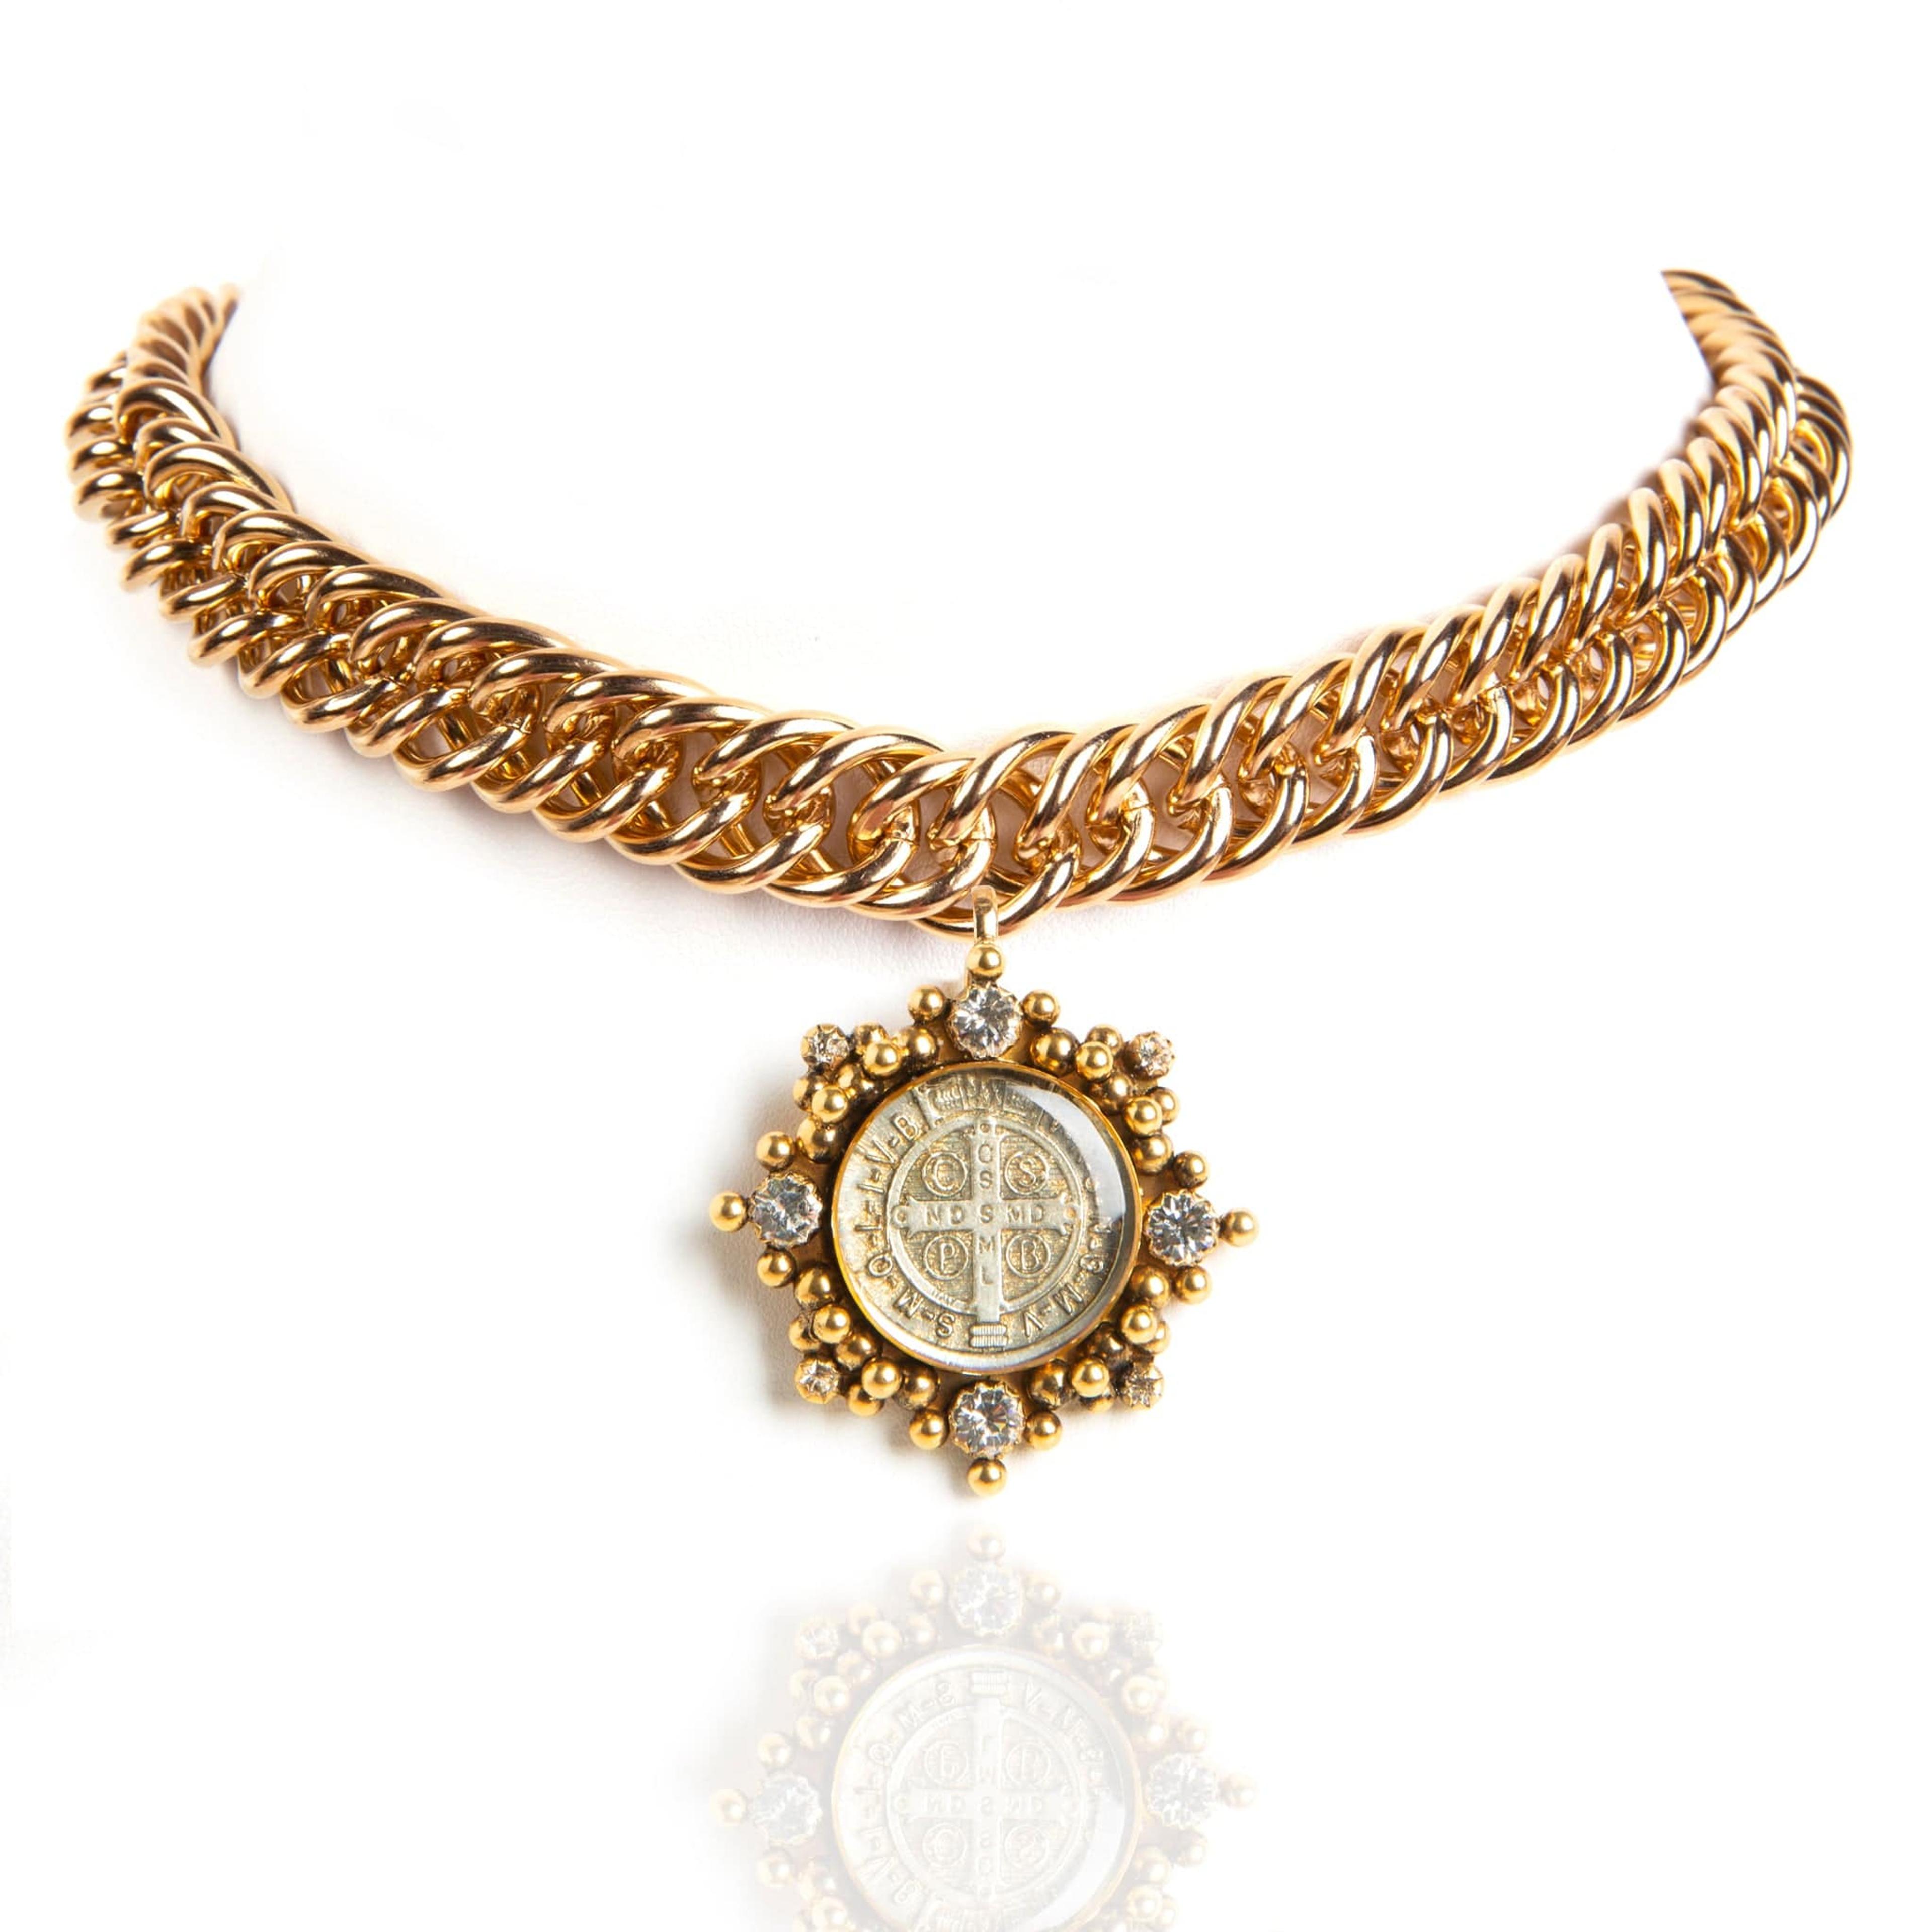 Iconic Chain Choker with Luxury Medallion is on a trendy statement chain – Virgins Saints & Angels